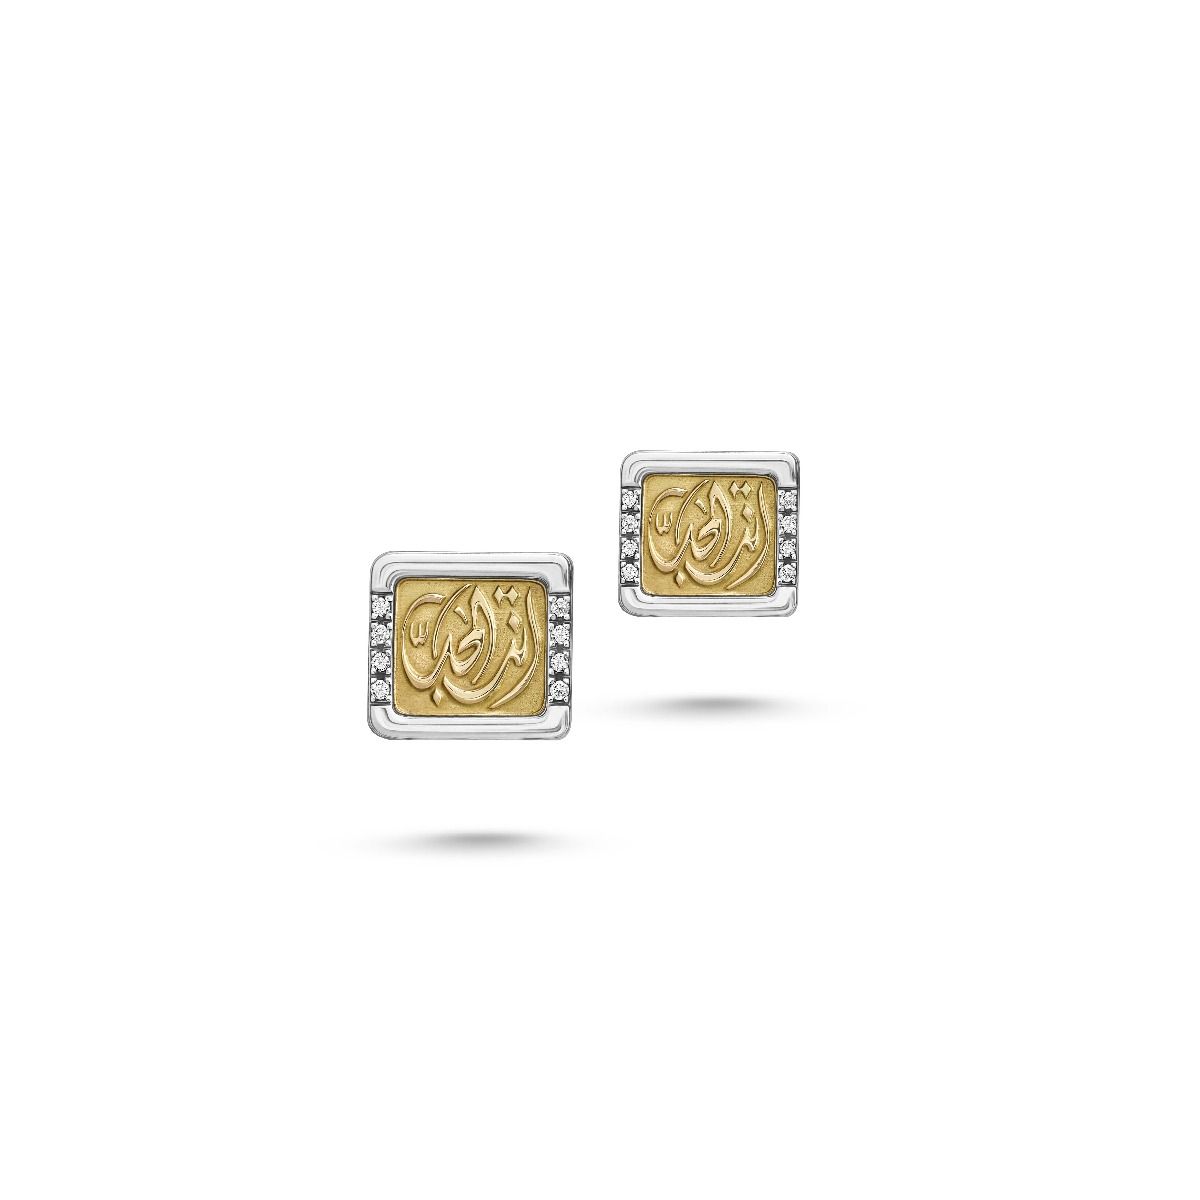 You are The One Stud Earrings by Azza Fahmy - Designer Earrings